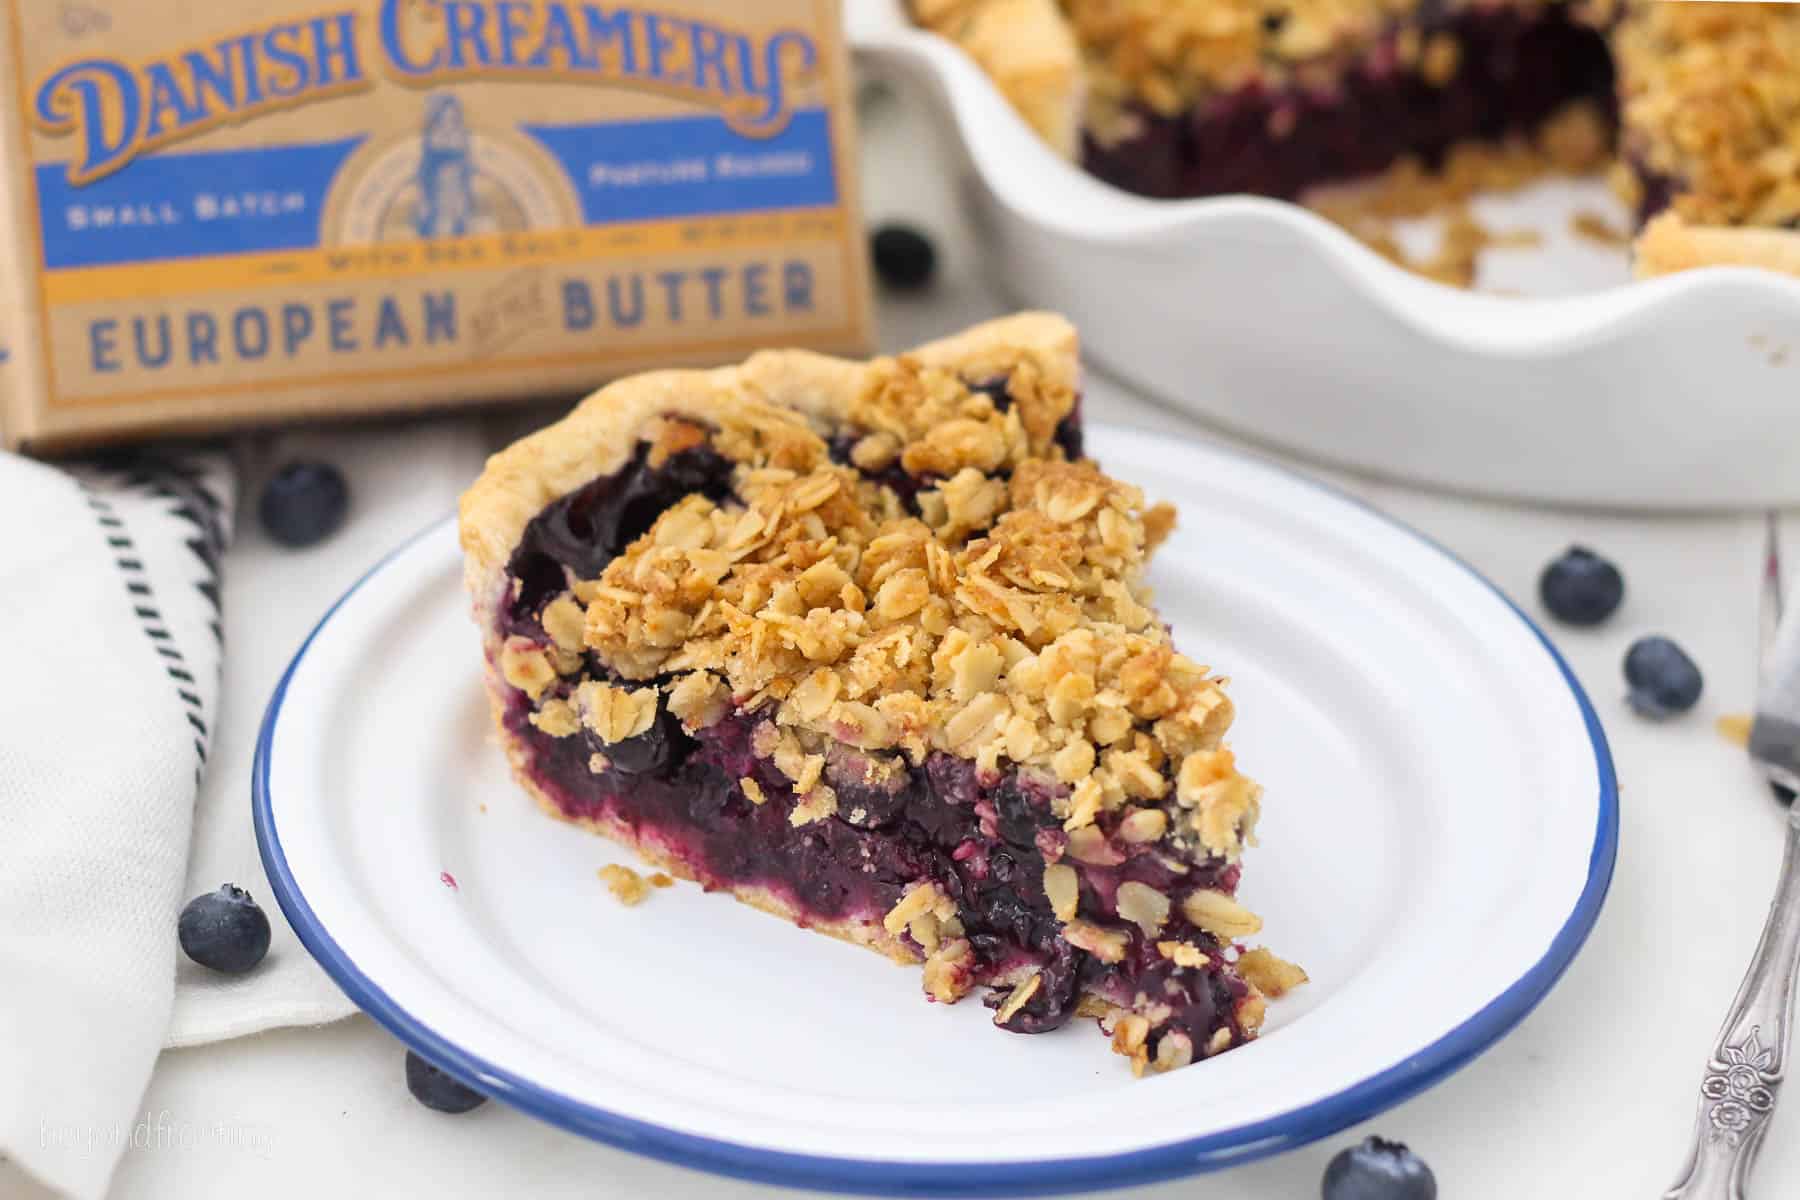 A slice of blueberry crumble pie on a white plate with a brick of butter in the background.